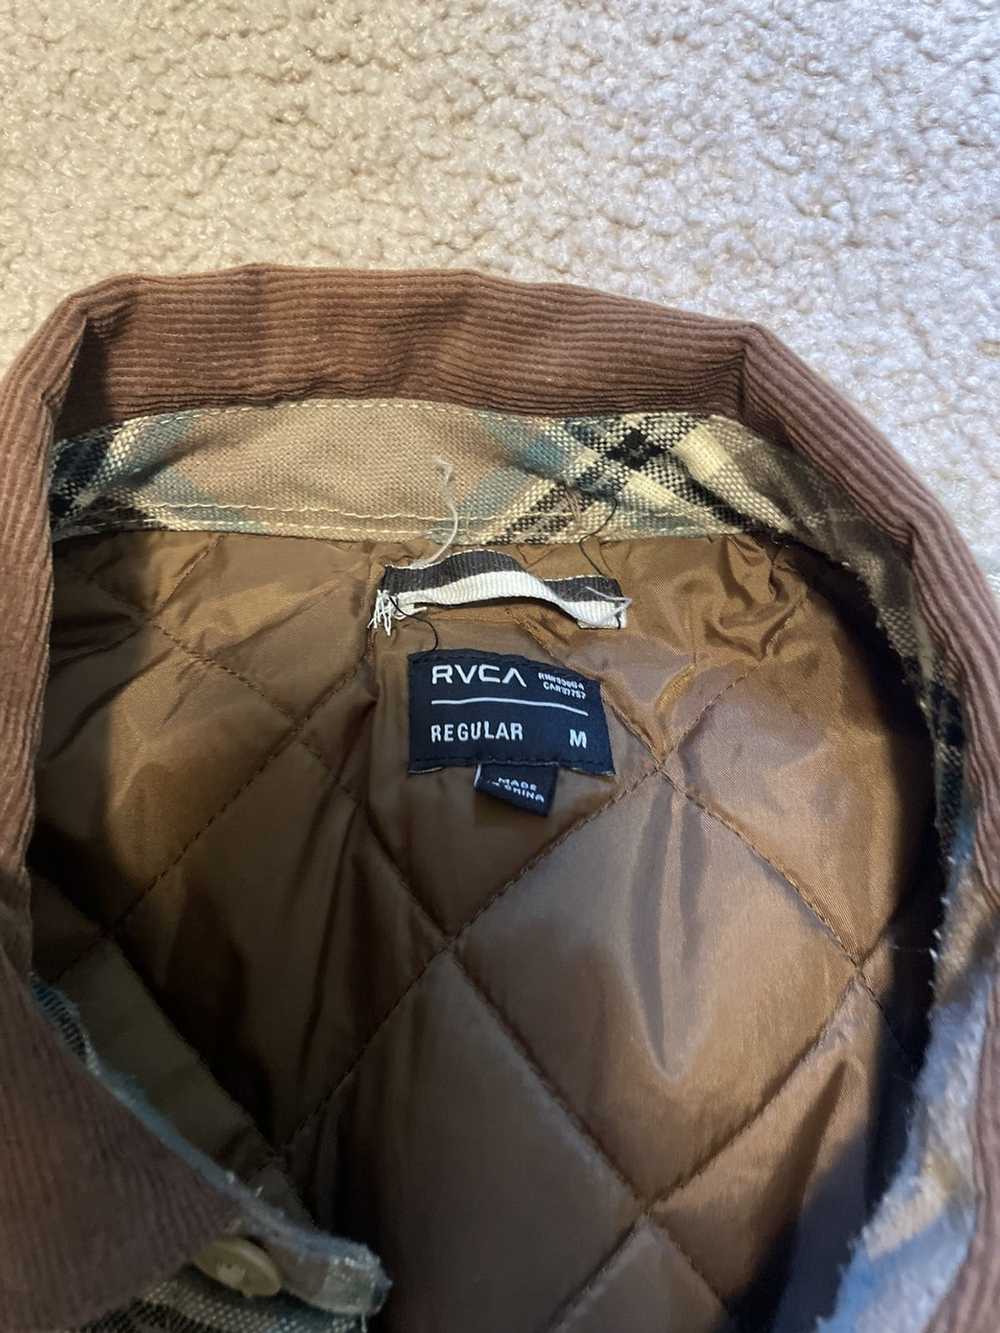 Rvca Button up army liner plaid jacket - image 2